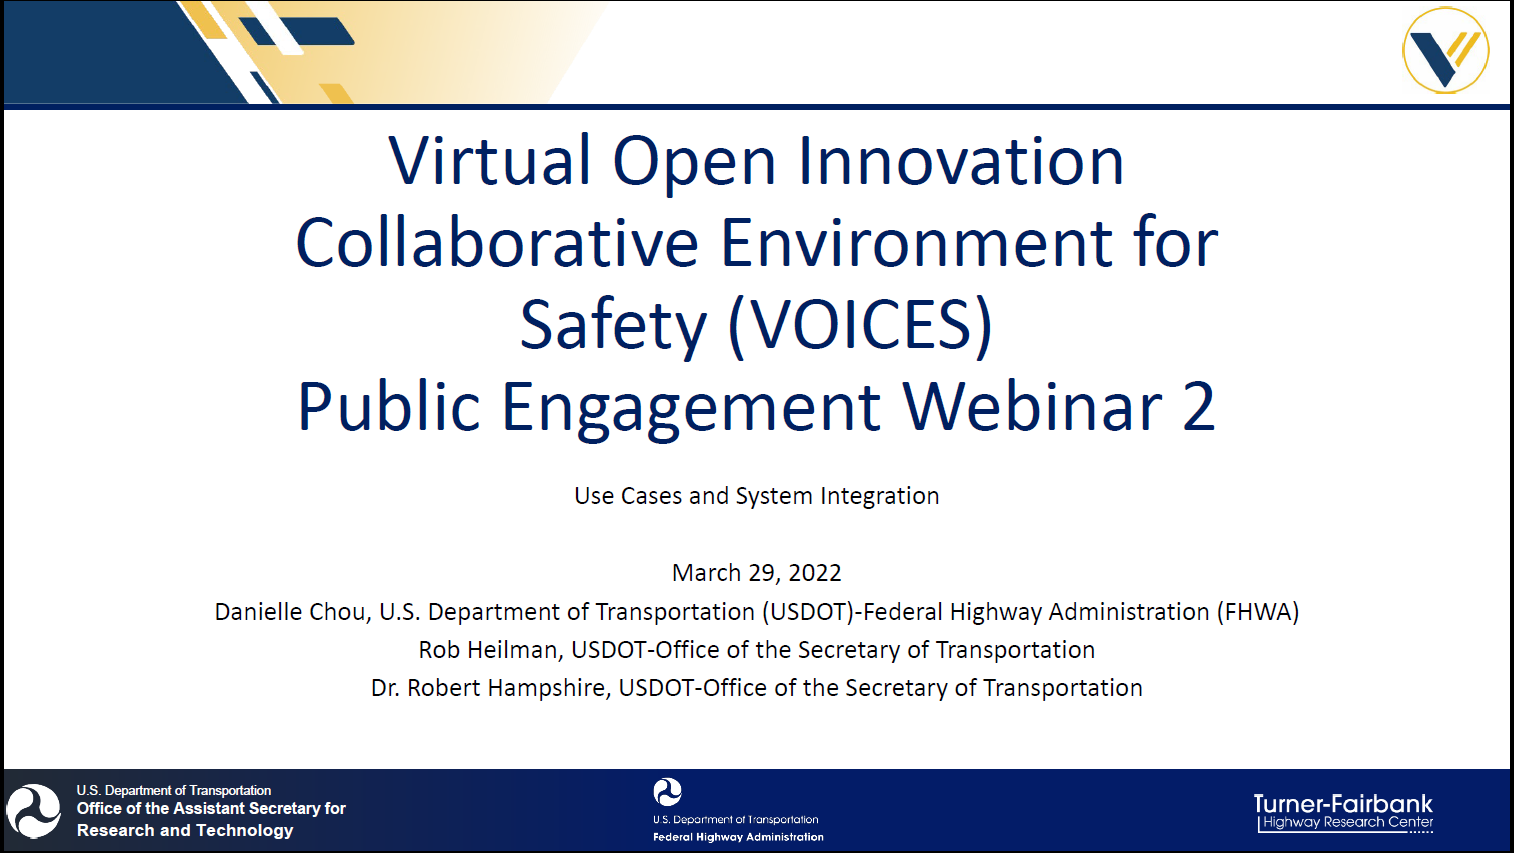 Virtual Open Innovation Collaborative Environment for Safety (VOICES) Public Engagement Webinar 2 PDF Cover Image